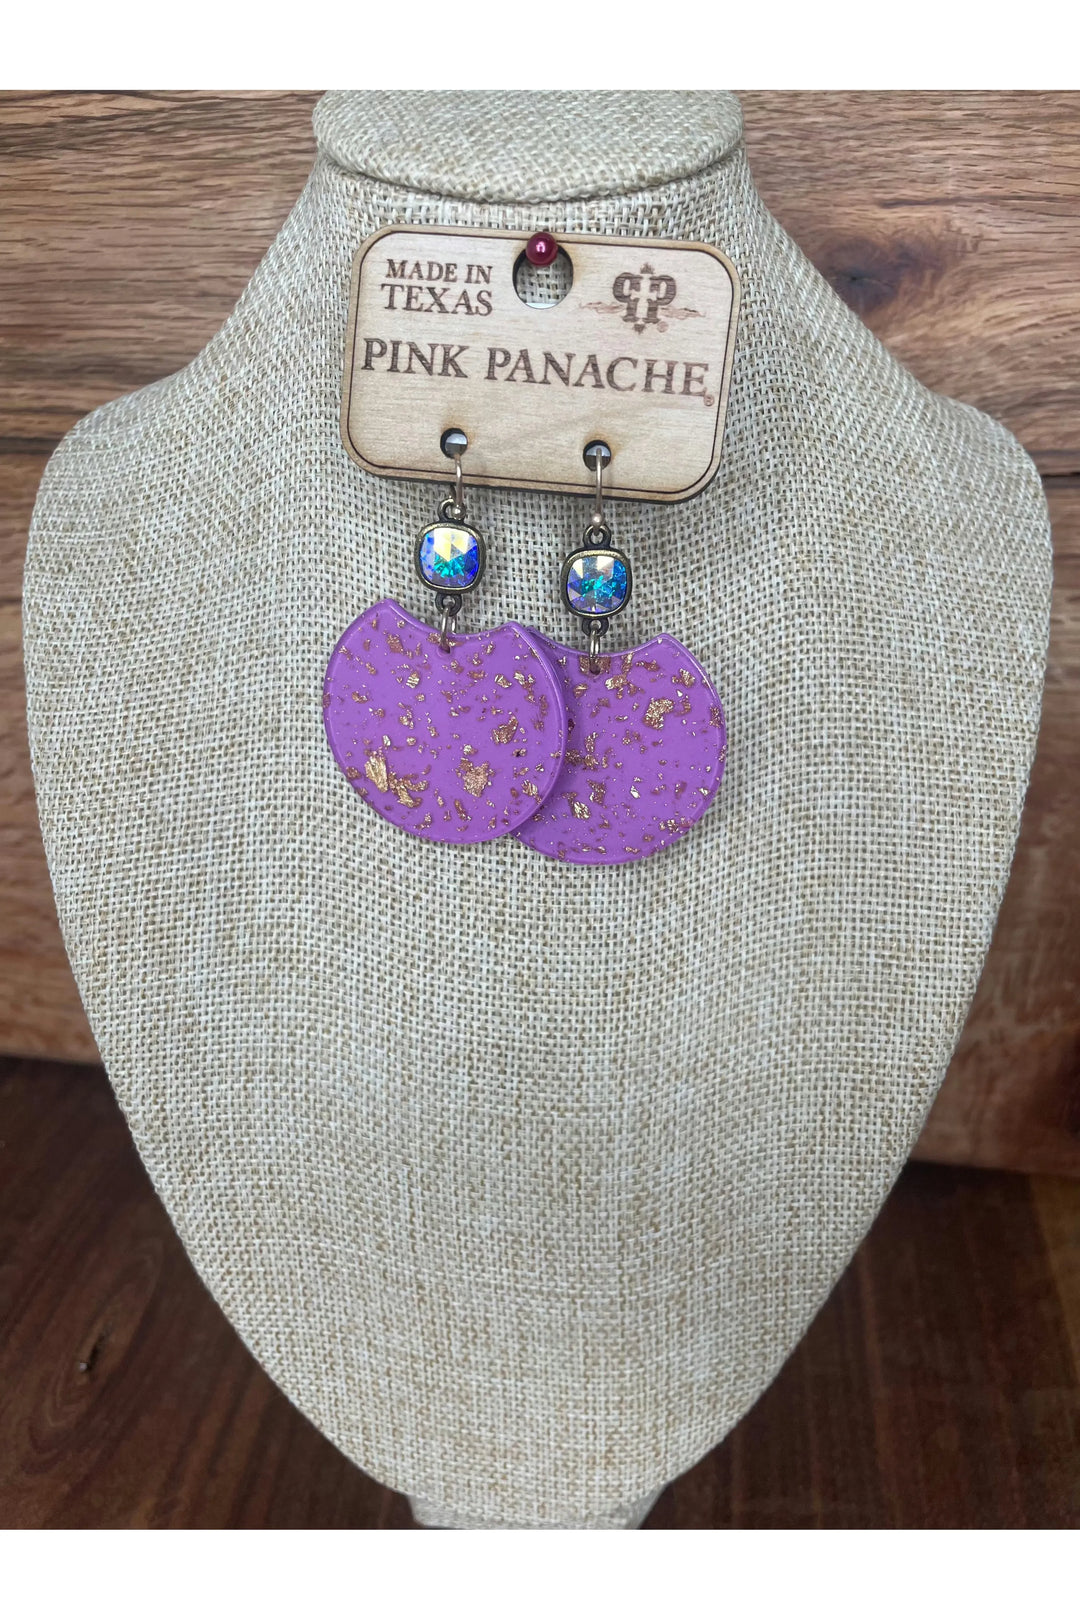 Pink Panache- Purple/Gold Acrylic Disc with AB Crystal Pendant - Vintage Dragonfly